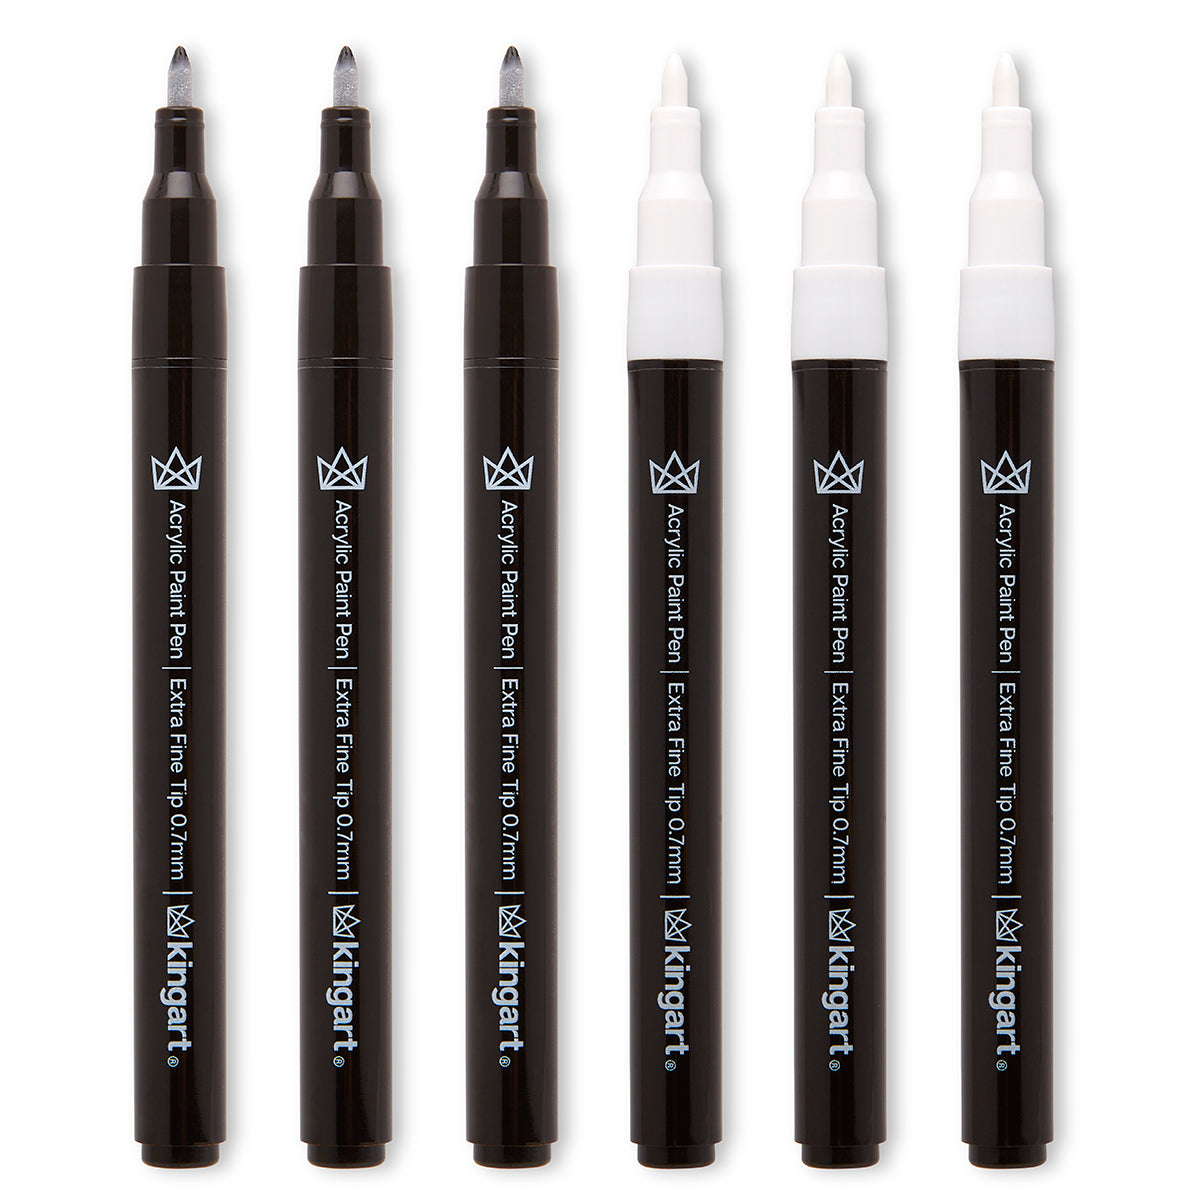 10 Black Acrylic Paint Pens, Double Pack of Both Extra Fine and Medium Tip Paint Markers - ArtShip Design, Size: 10 Pack